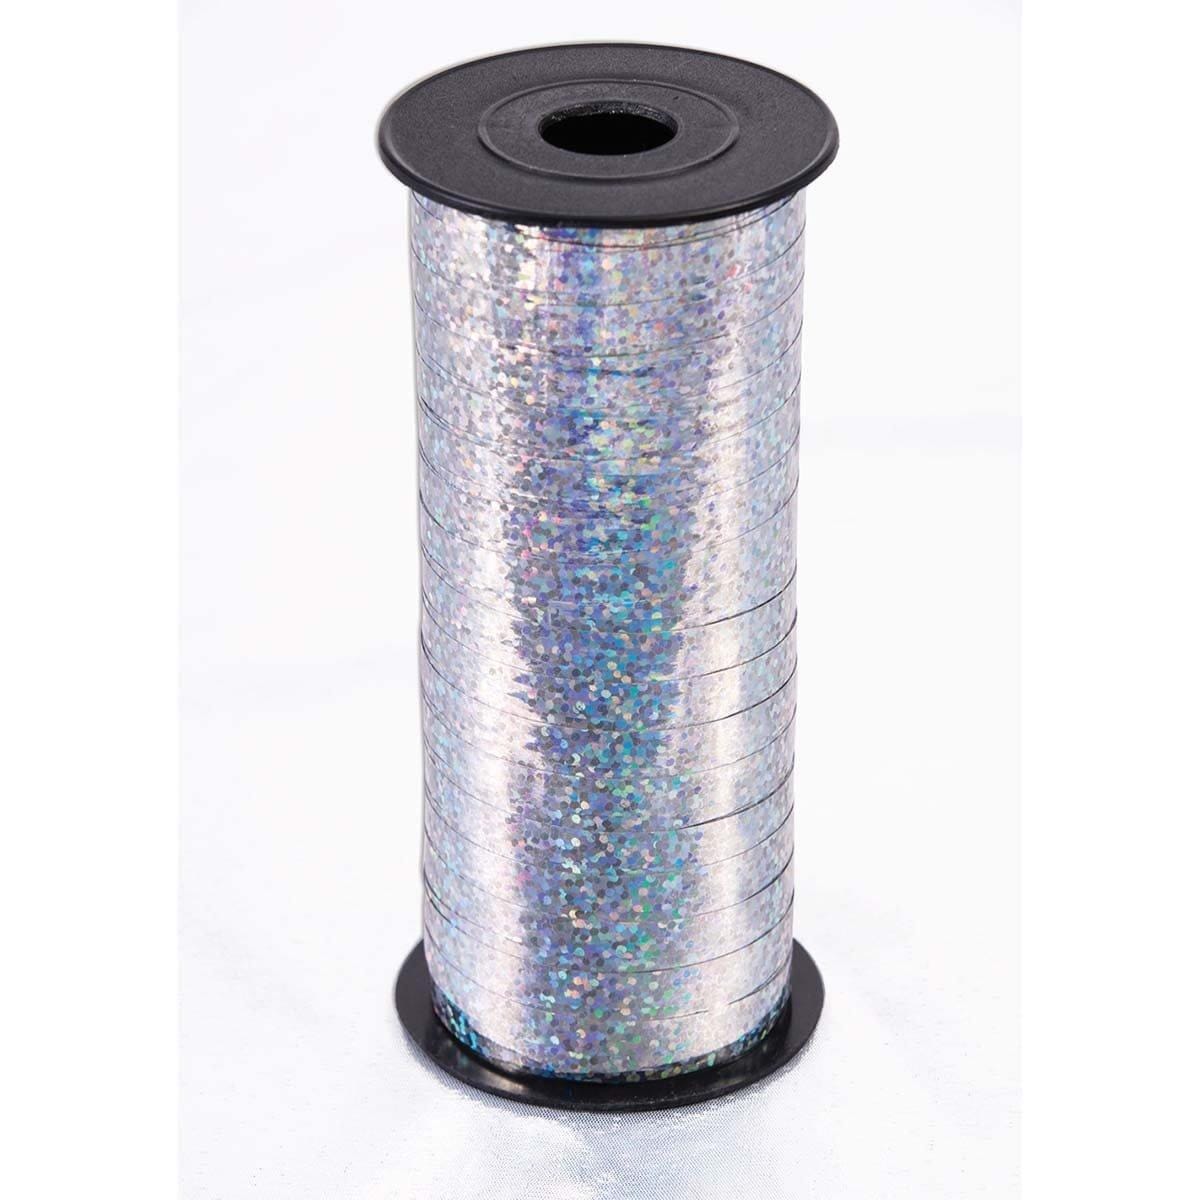 Buy Balloons Iridescent Silver Curling Ribbon, 3/16 Inches x 500 Yards sold at Party Expert